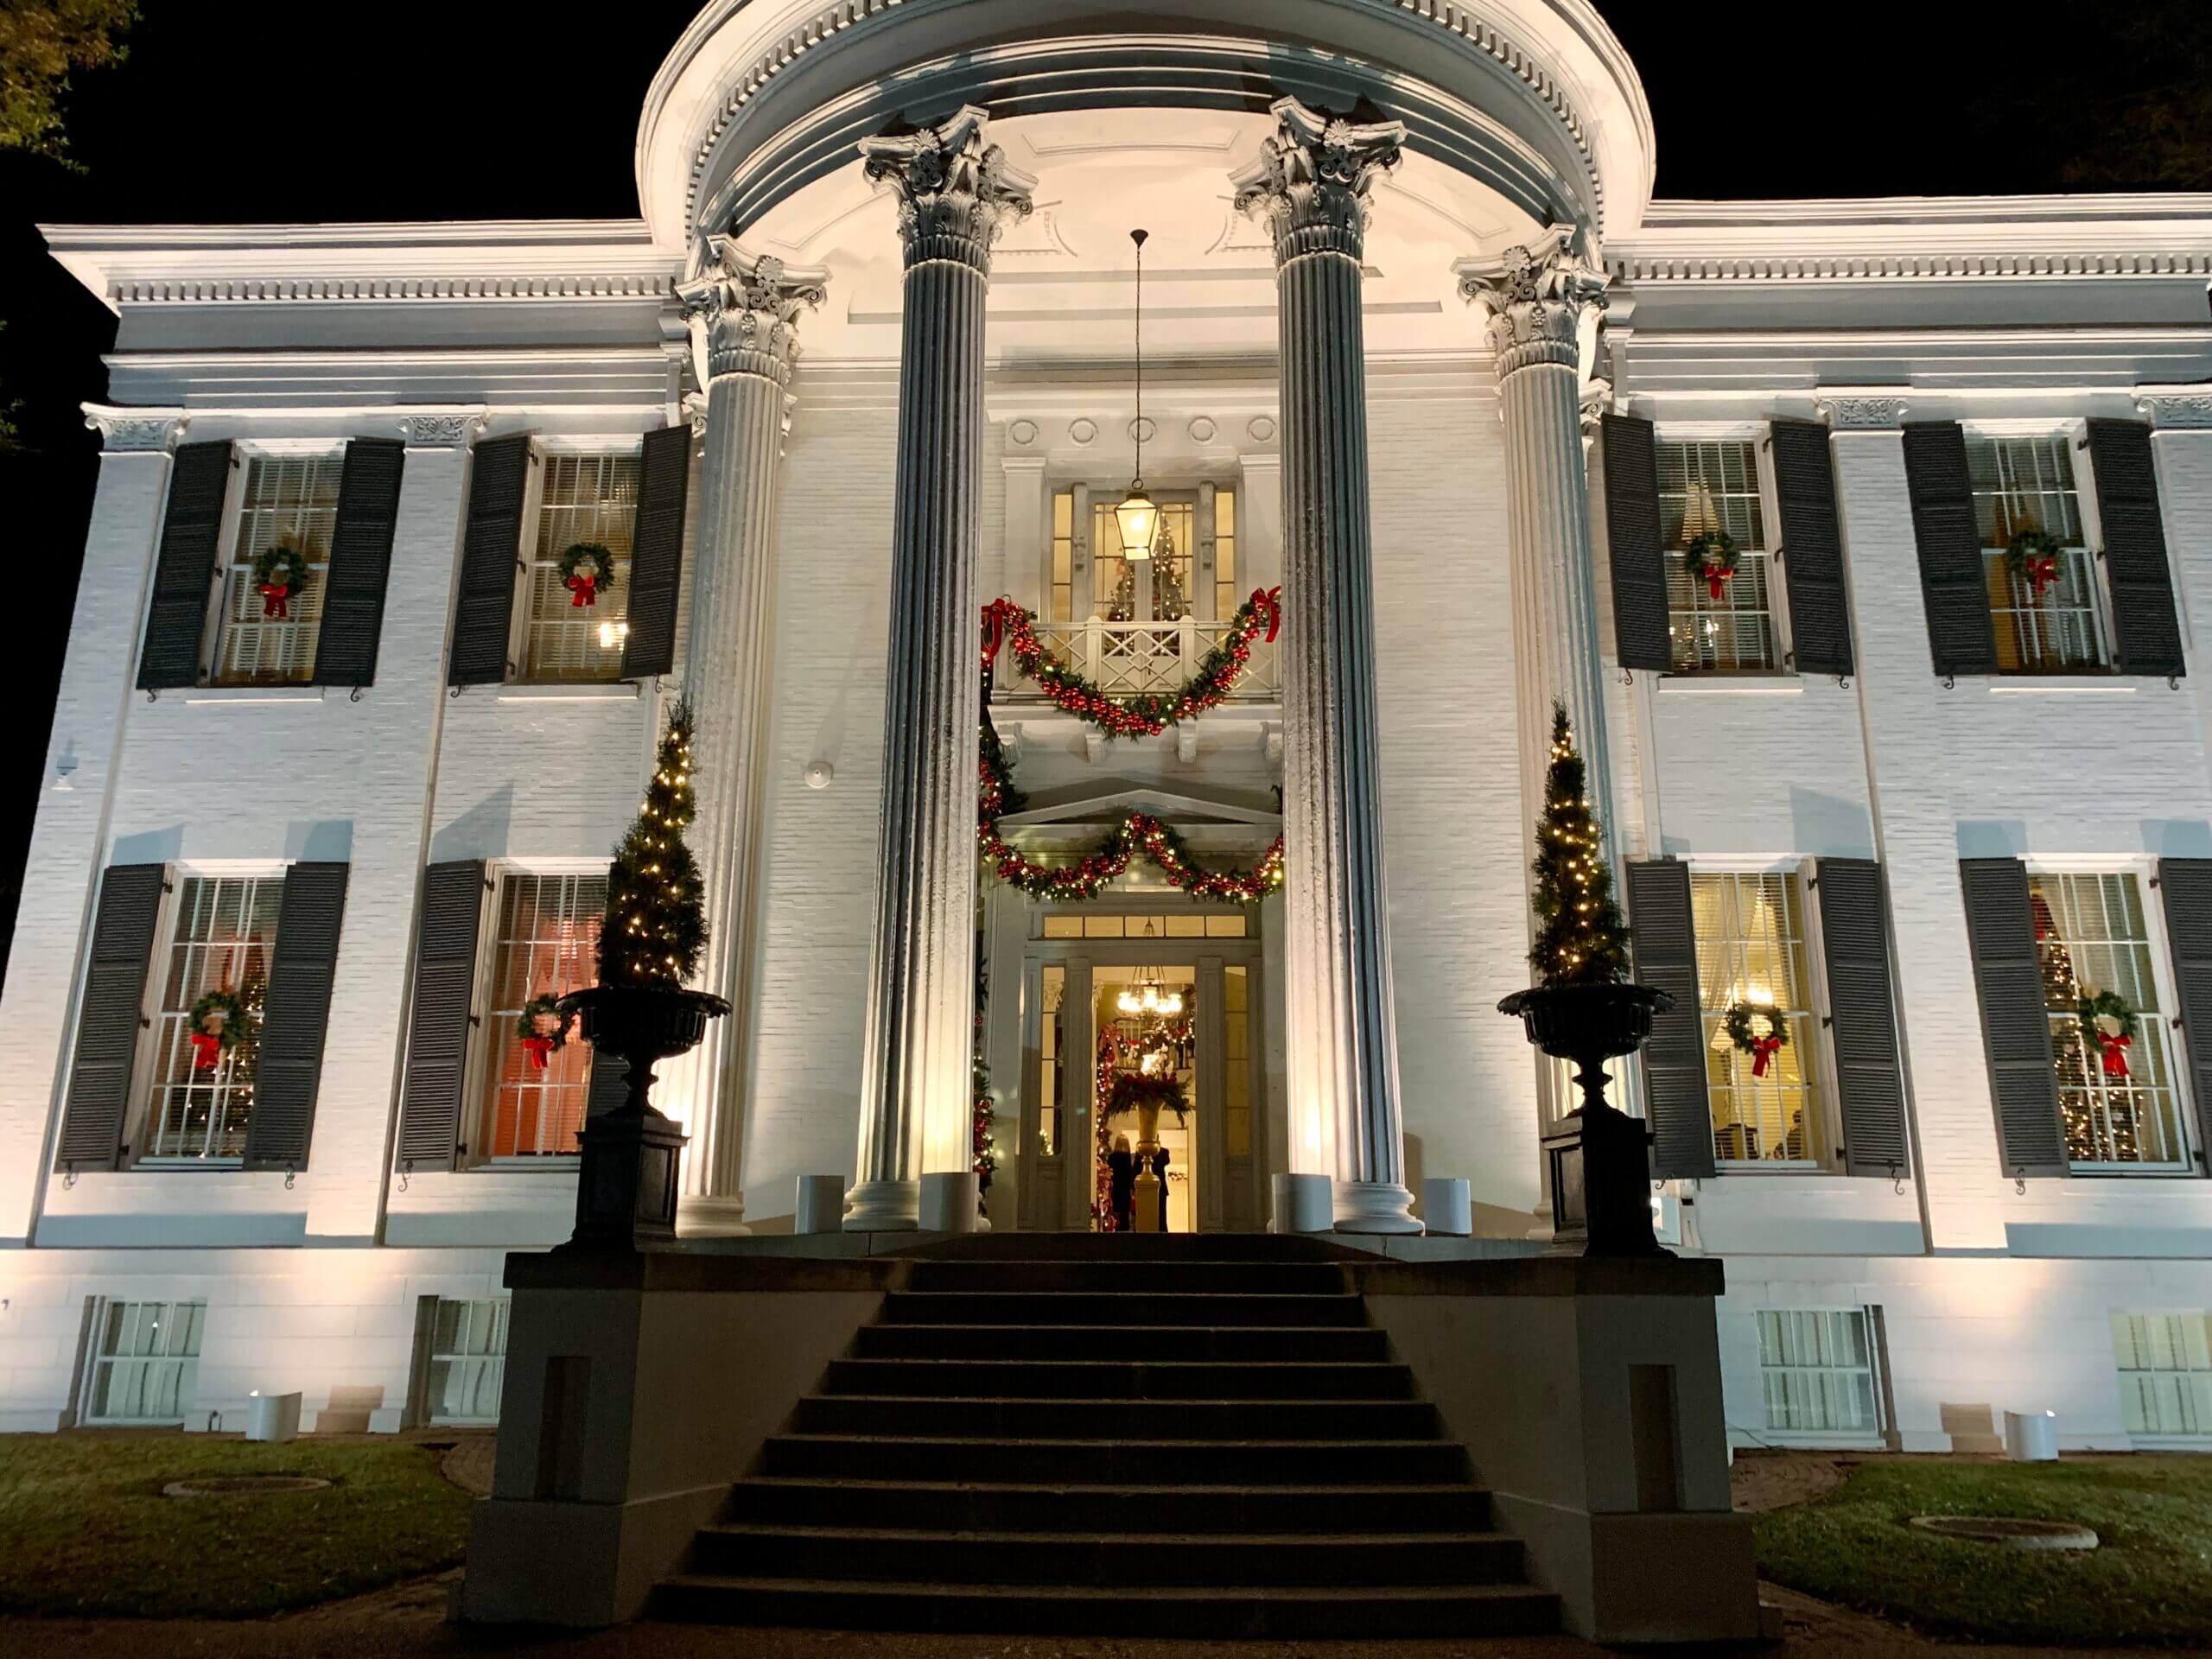 "Christmas at the Mansion" theme announced DeSoto County News